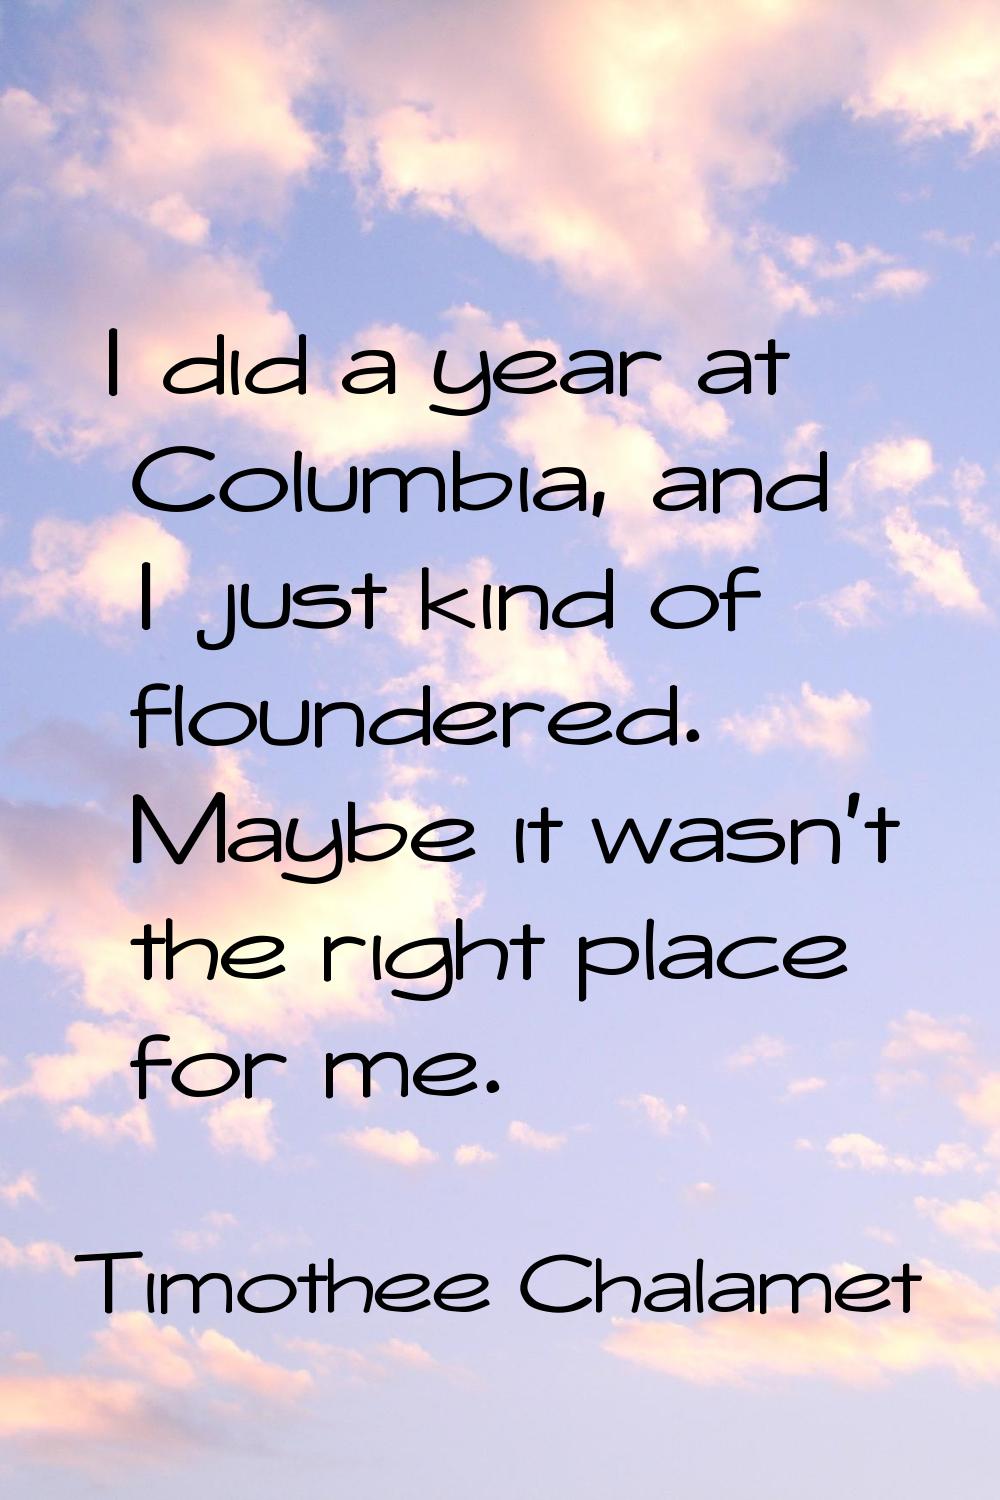 I did a year at Columbia, and I just kind of floundered. Maybe it wasn't the right place for me.